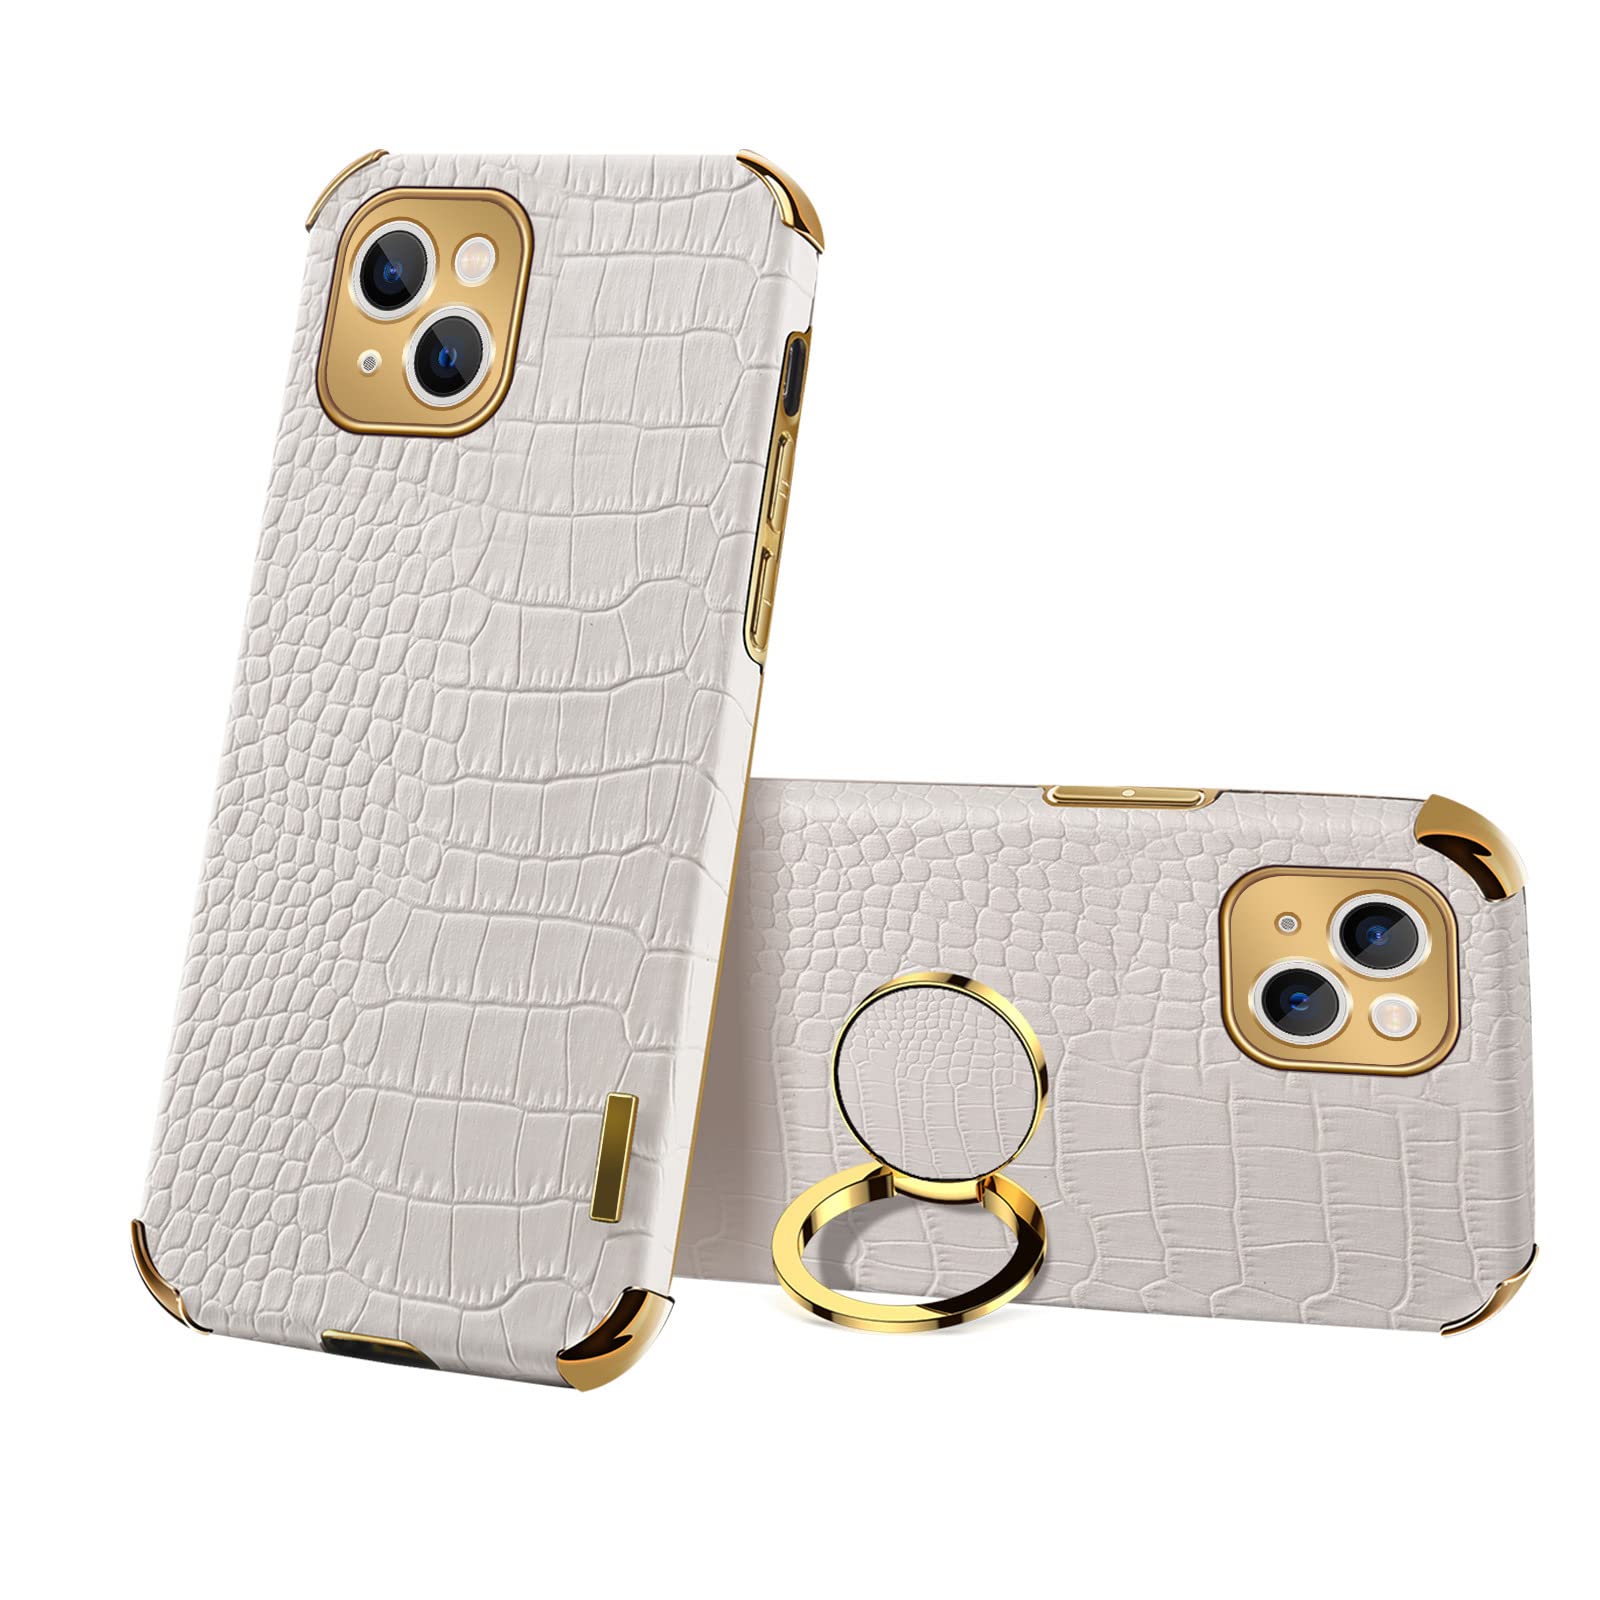 Guppy Compatible with iPhone 13 Mini Ring Holder Case Cool Crocodile Snake Skin Pattern Textured with 360 Degree Rotation Stand for Woman Man Slim Soft Bumper Protective Cover 5.4 inch White